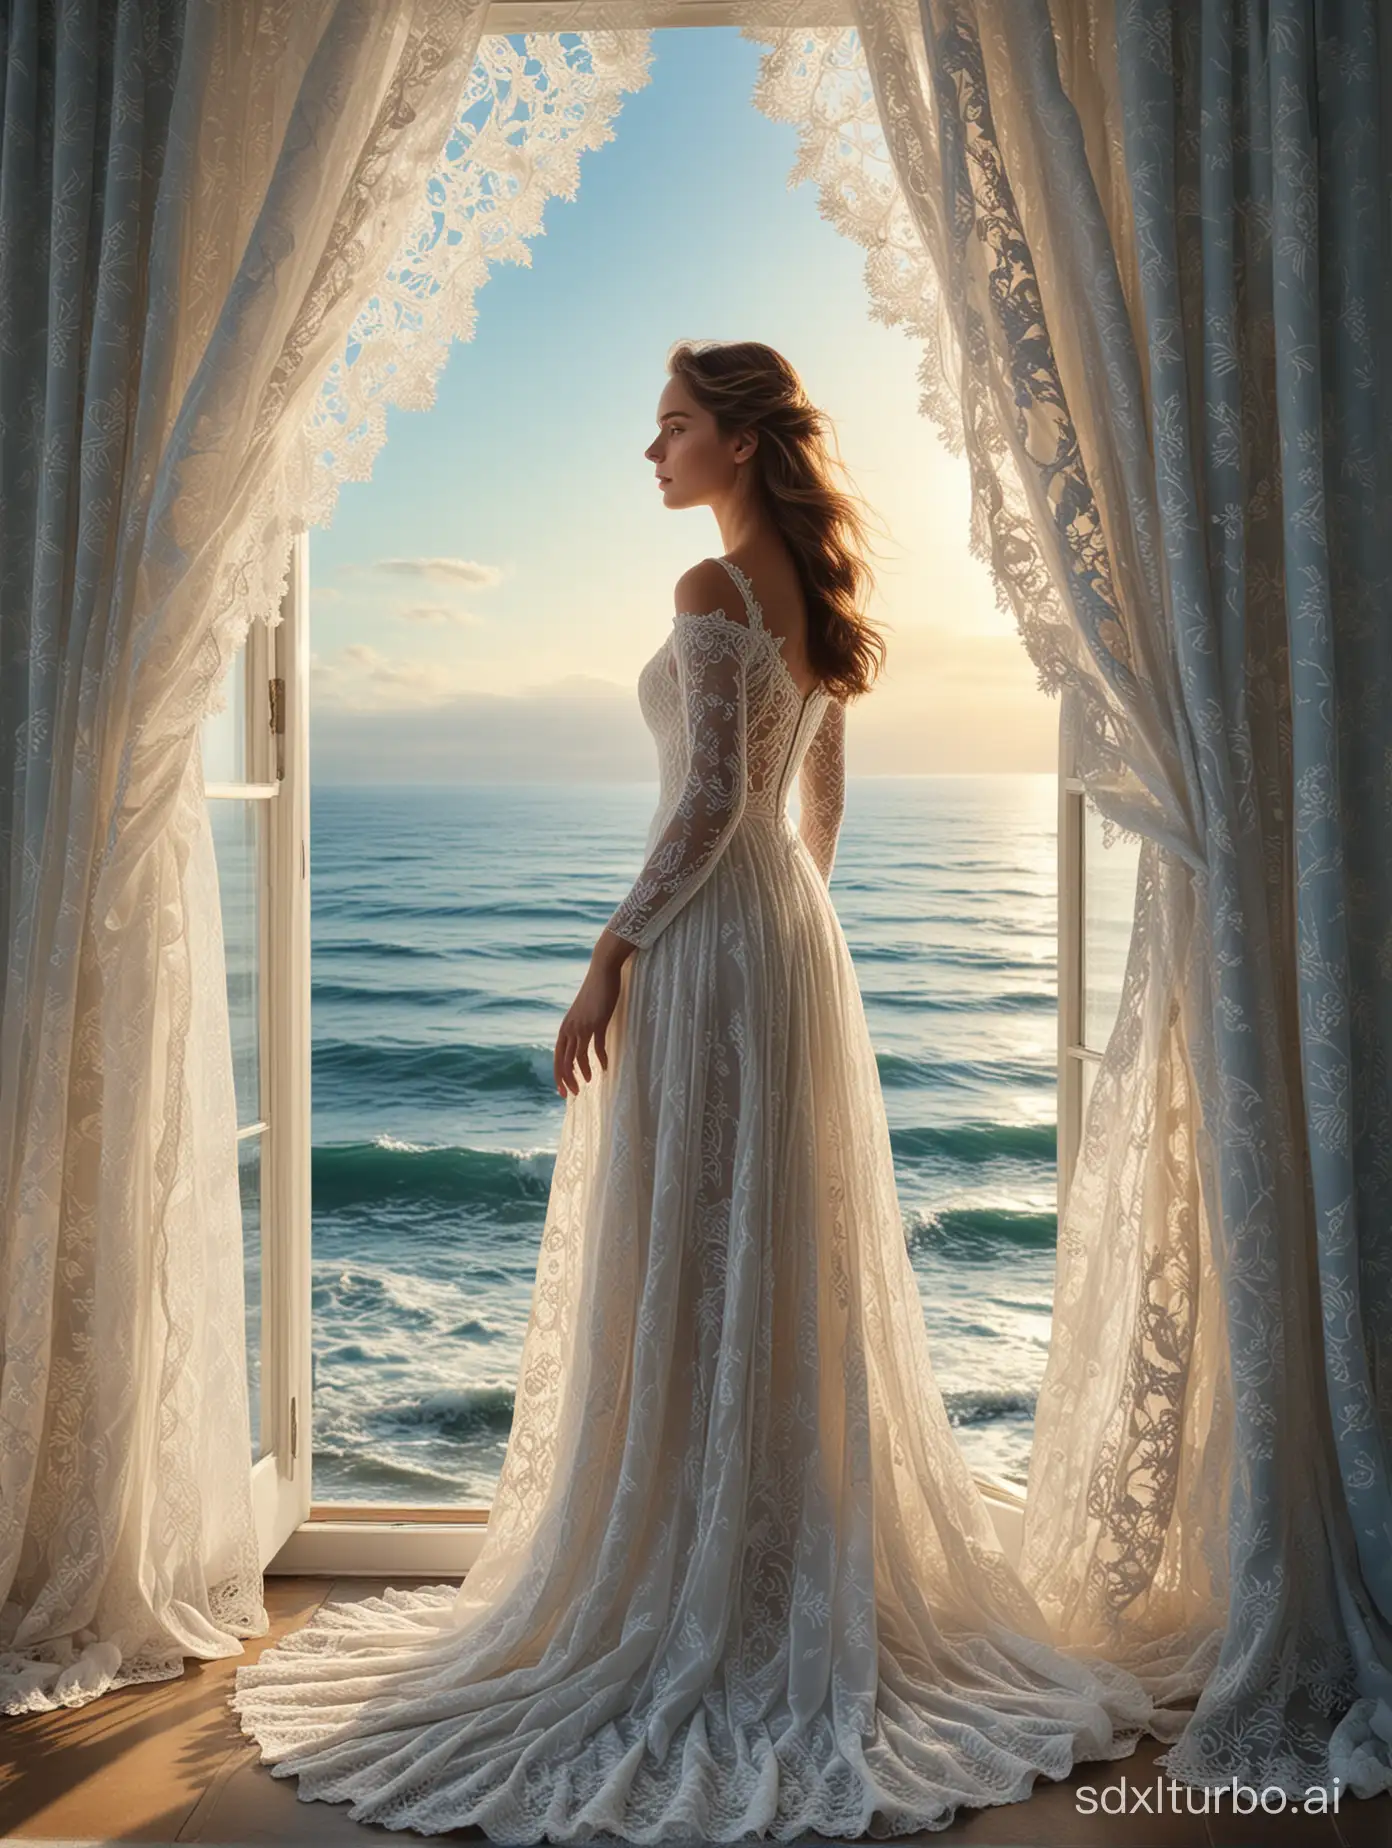 "Imagine a stunning scene where a beautiful woman gazes out of a window, her silhouette framed against the backdrop of a vast blue sea stretching towards the horizon. The gentle sunlight bathes her features, accentuating her delicate beauty as she contemplates the endless expanse ahead. Every detail, from the intricate lace curtains gently swaying in the breeze to the subtle interplay of light on her skin, adds depth and richness to the composition. It's a moment frozen in time, reminiscent of the timeless elegance captured by artists like Monet in his tranquil seascapes."